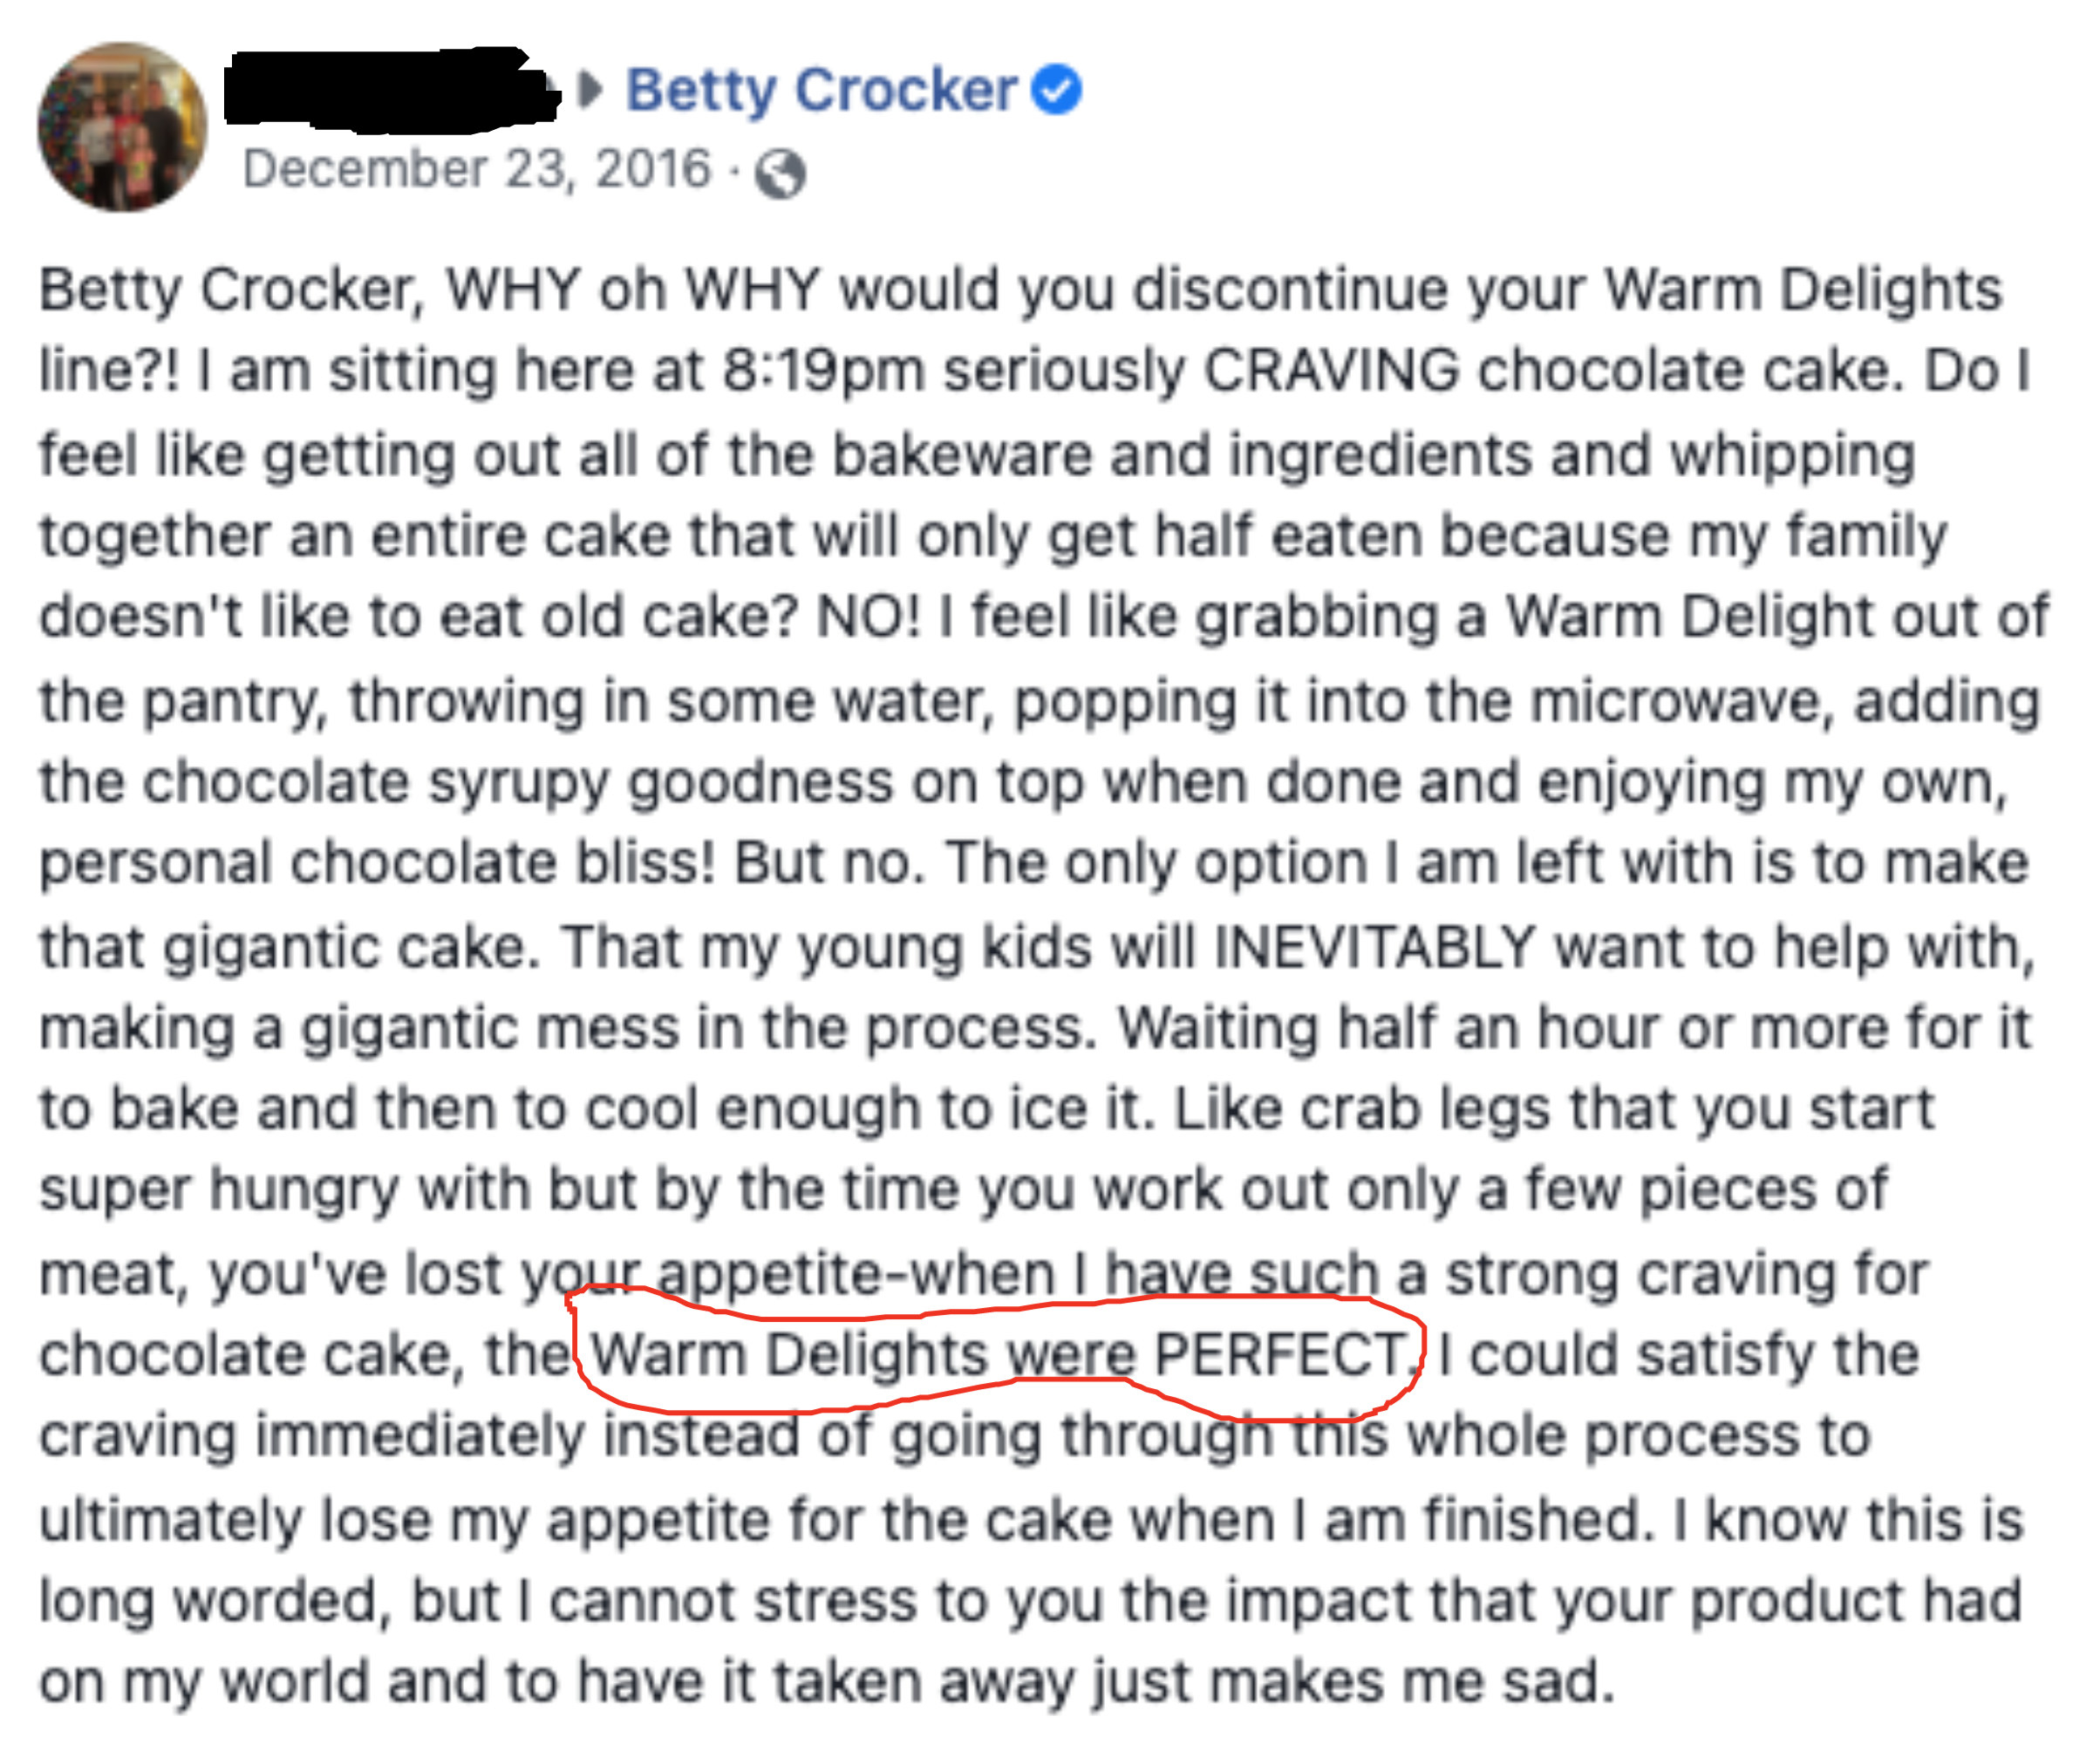 Customer writing a message to Betty Crocker&#x27;s Facebook complaining about Warm Delights being discontinued